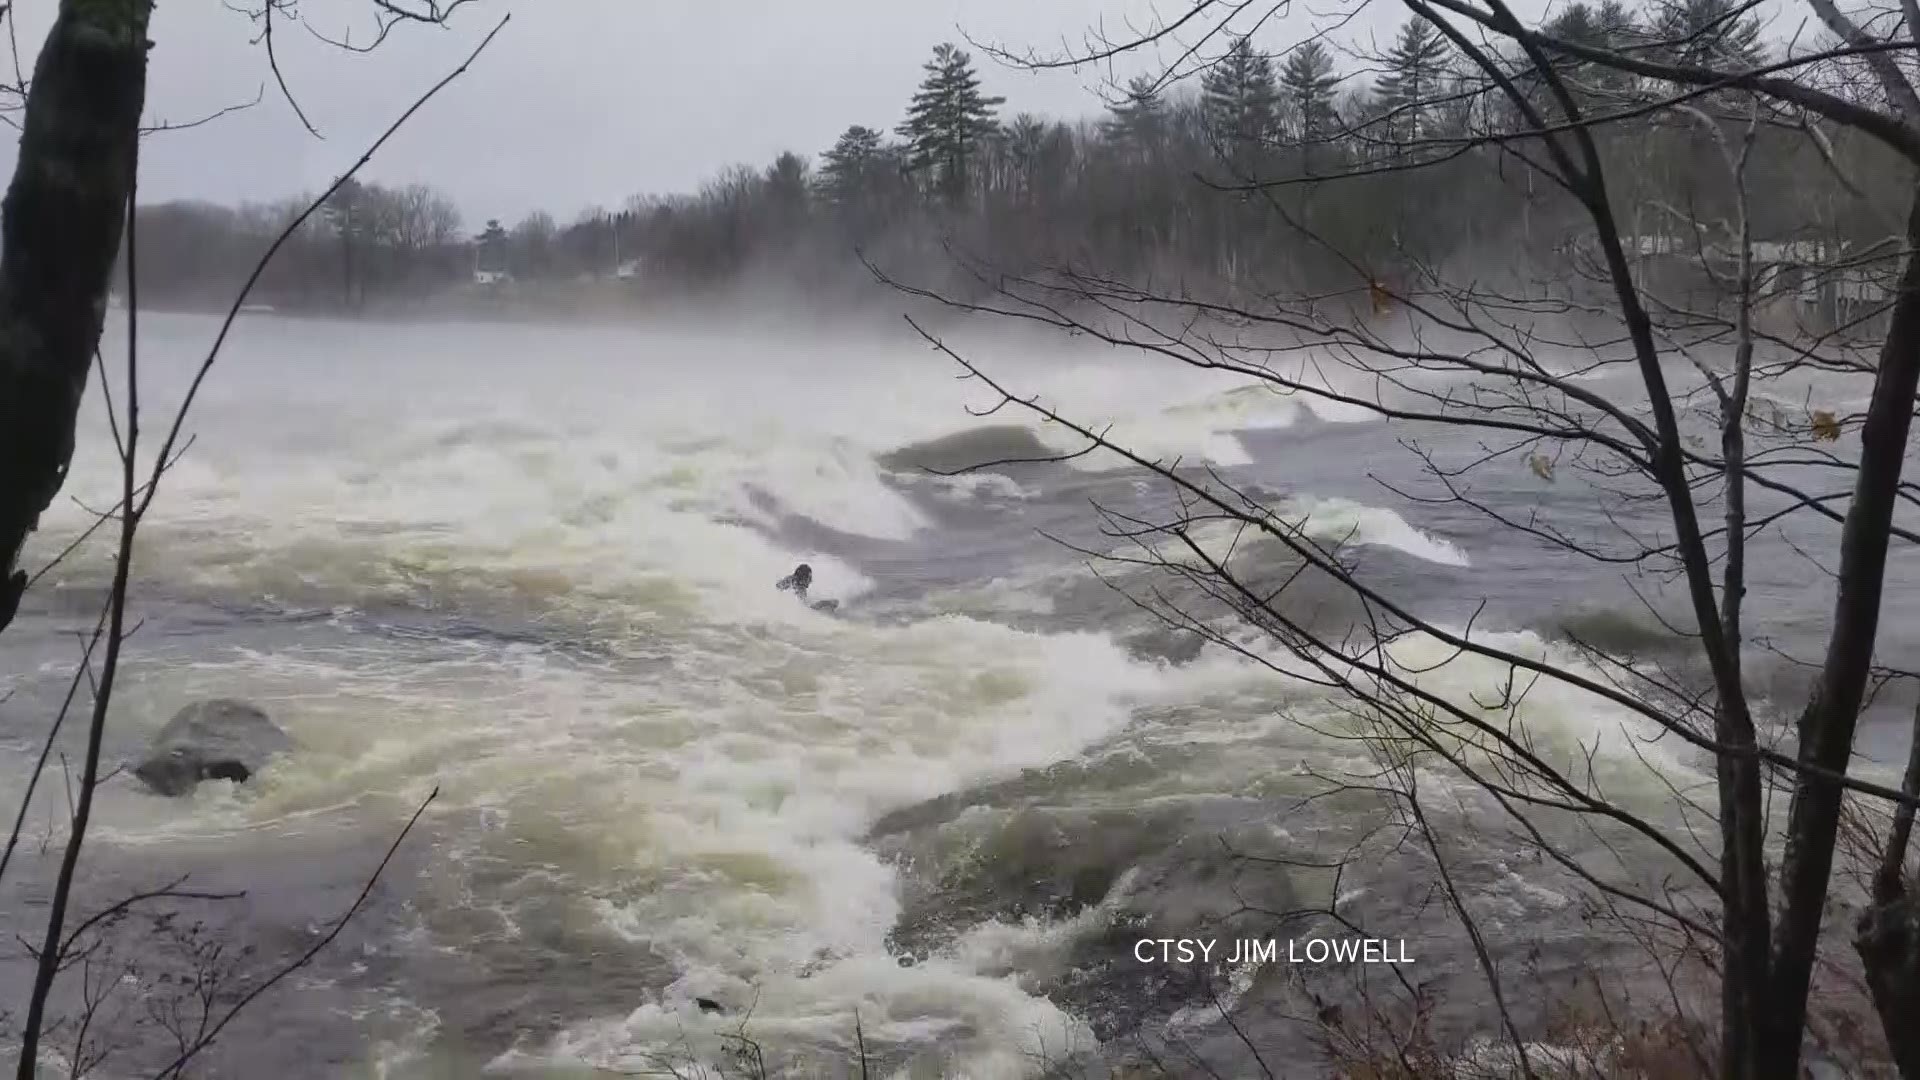 Boogie boarders braved the cold and fast Androscoggin waters for a nice ride on Saturday's Spring runoff.